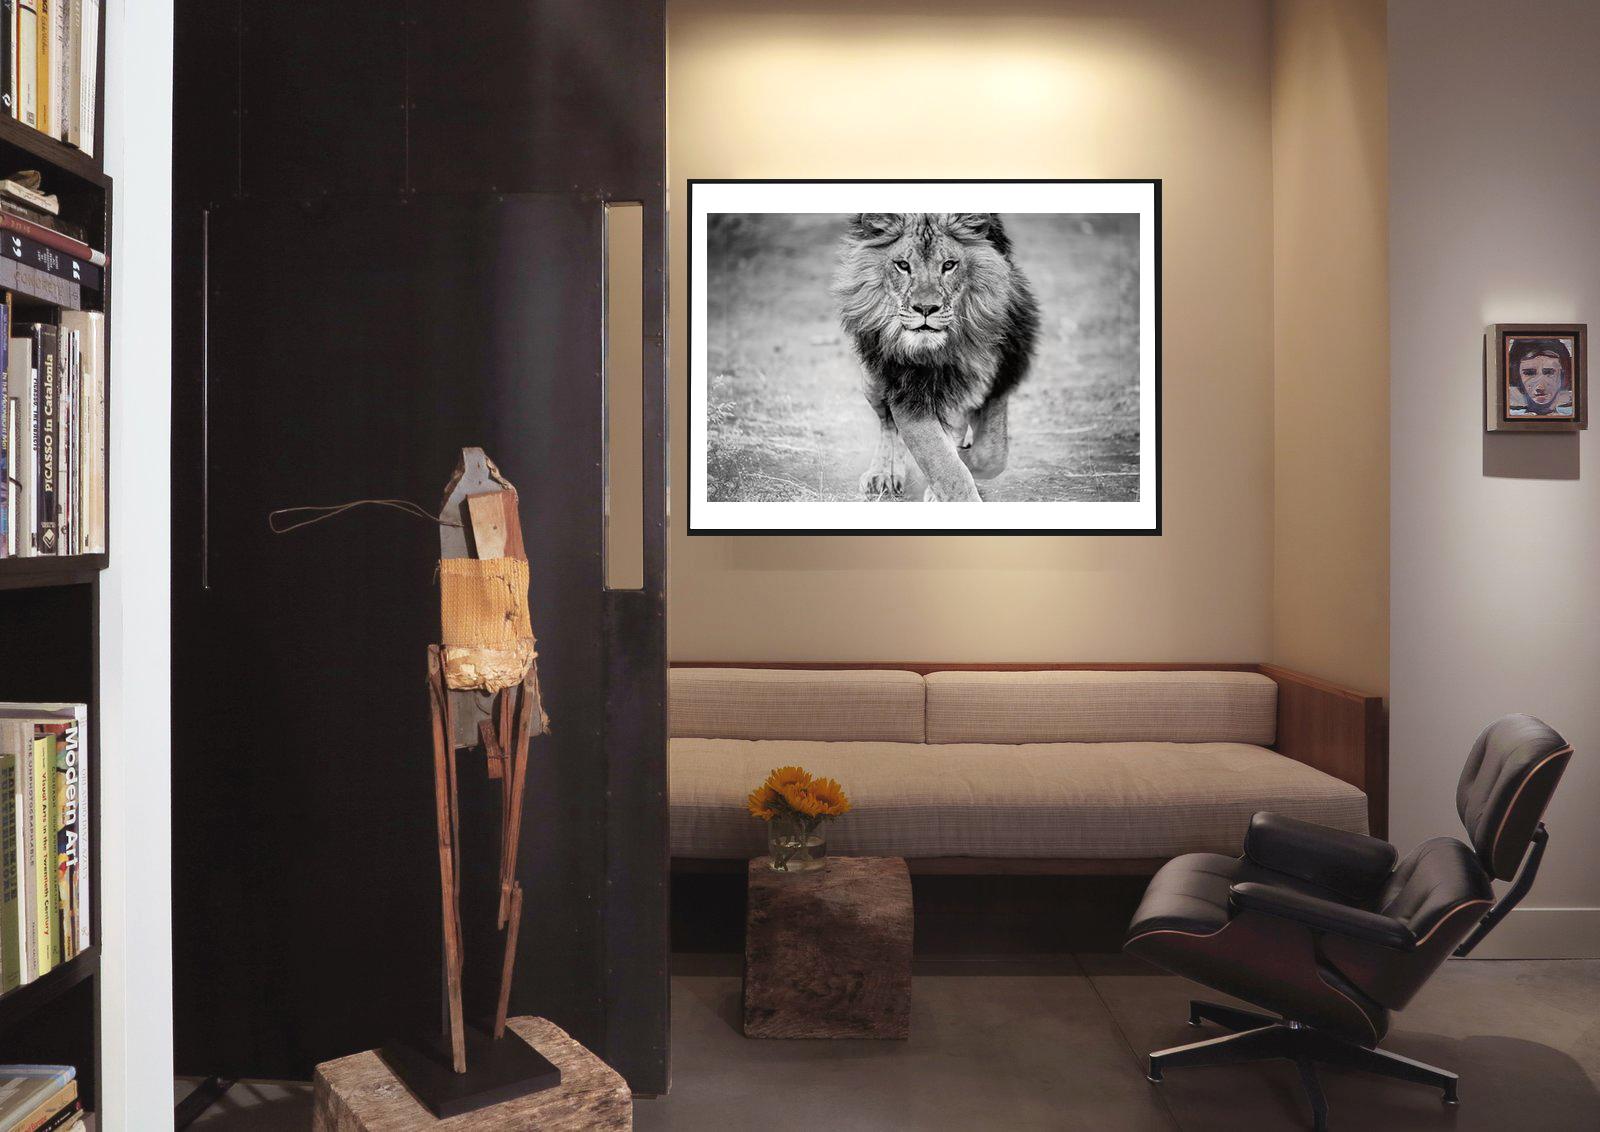 This is a contemporary photograph of an African Lion. 
36x48 Edition of 12. Signed by Shane. 
Printed on archival paper and using archival inks
Framing available. Inquire for rates. 

Shane Russeck has built a reputation for capturing America's